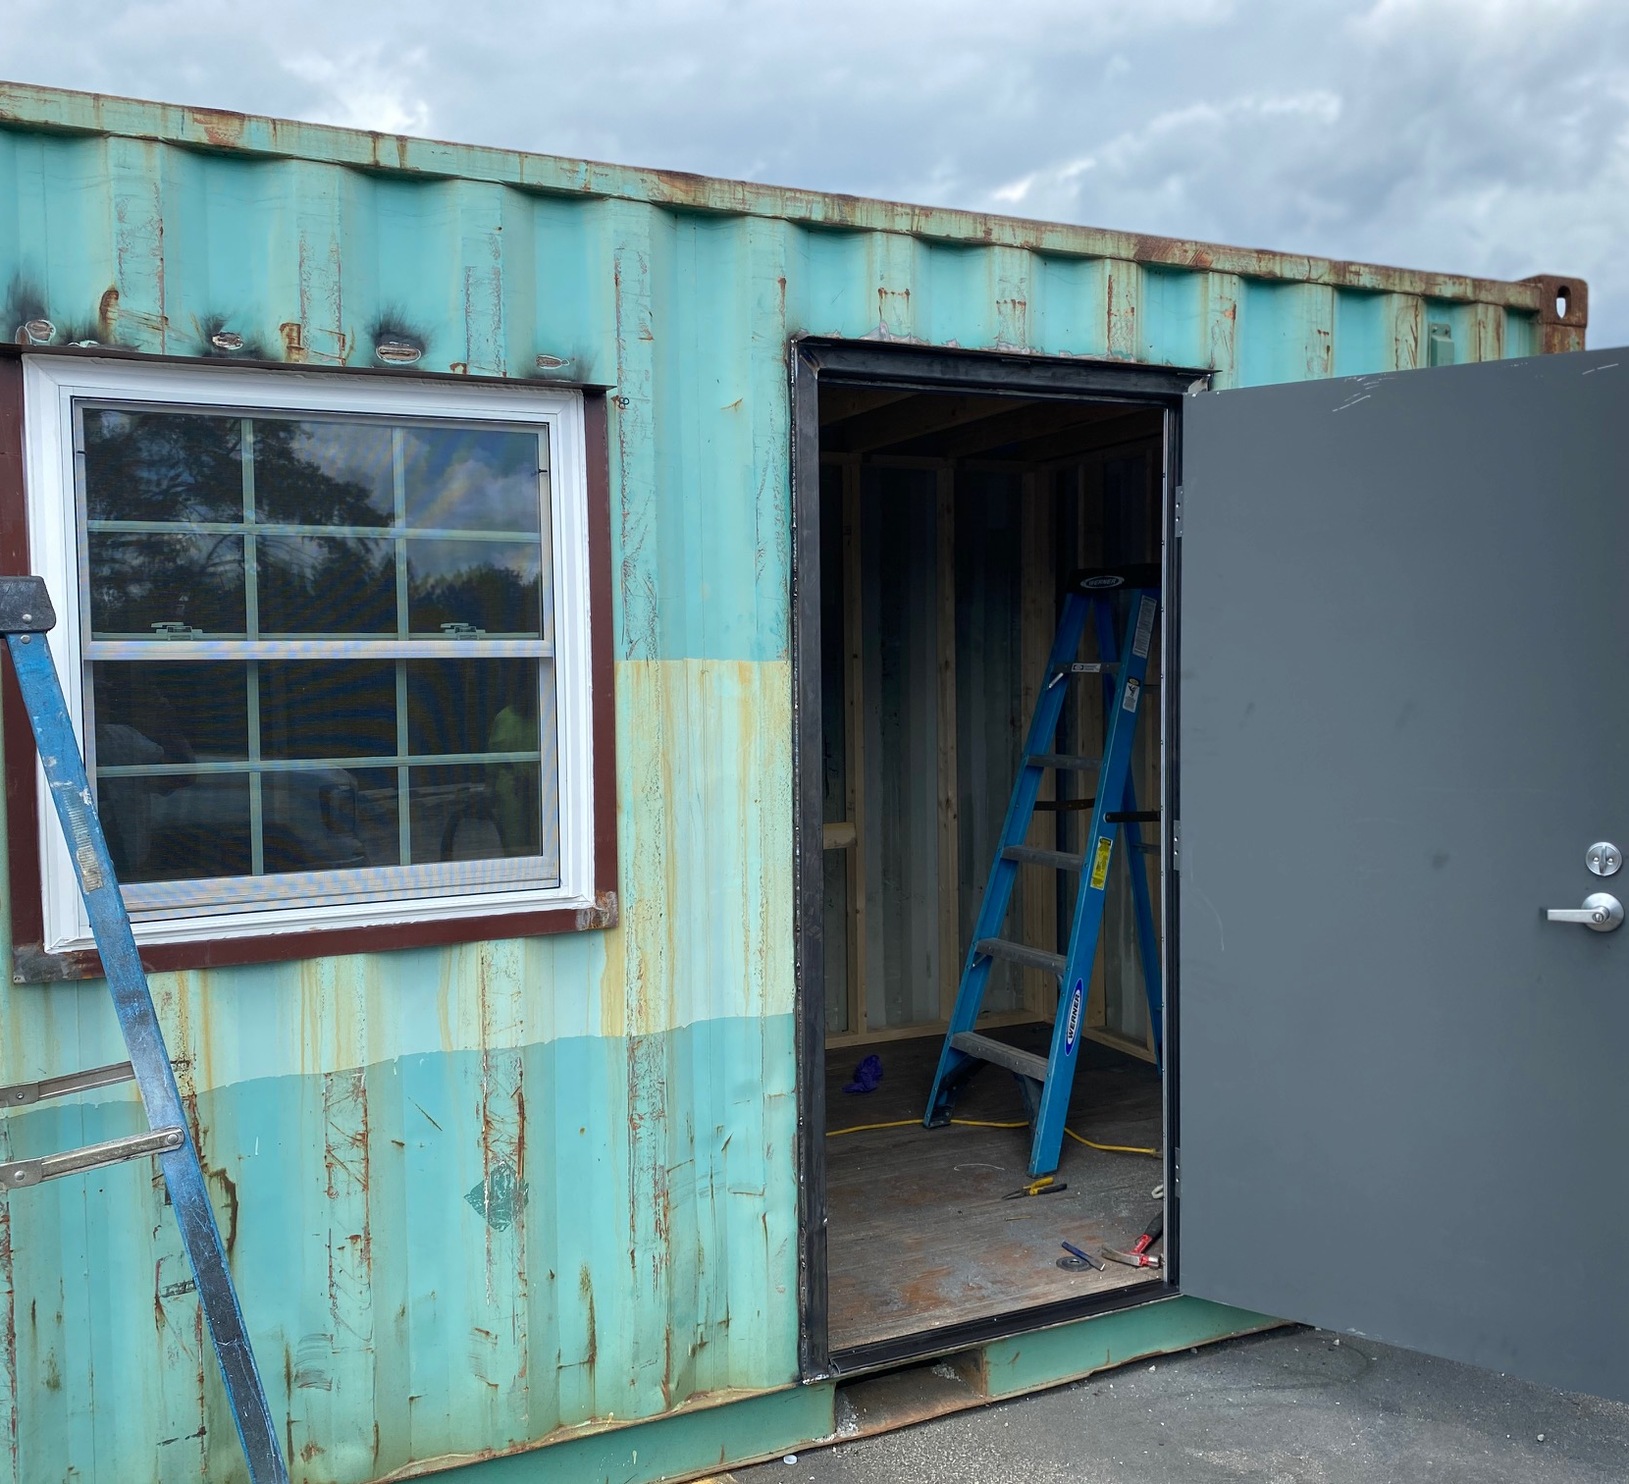 Teal storage container being modified